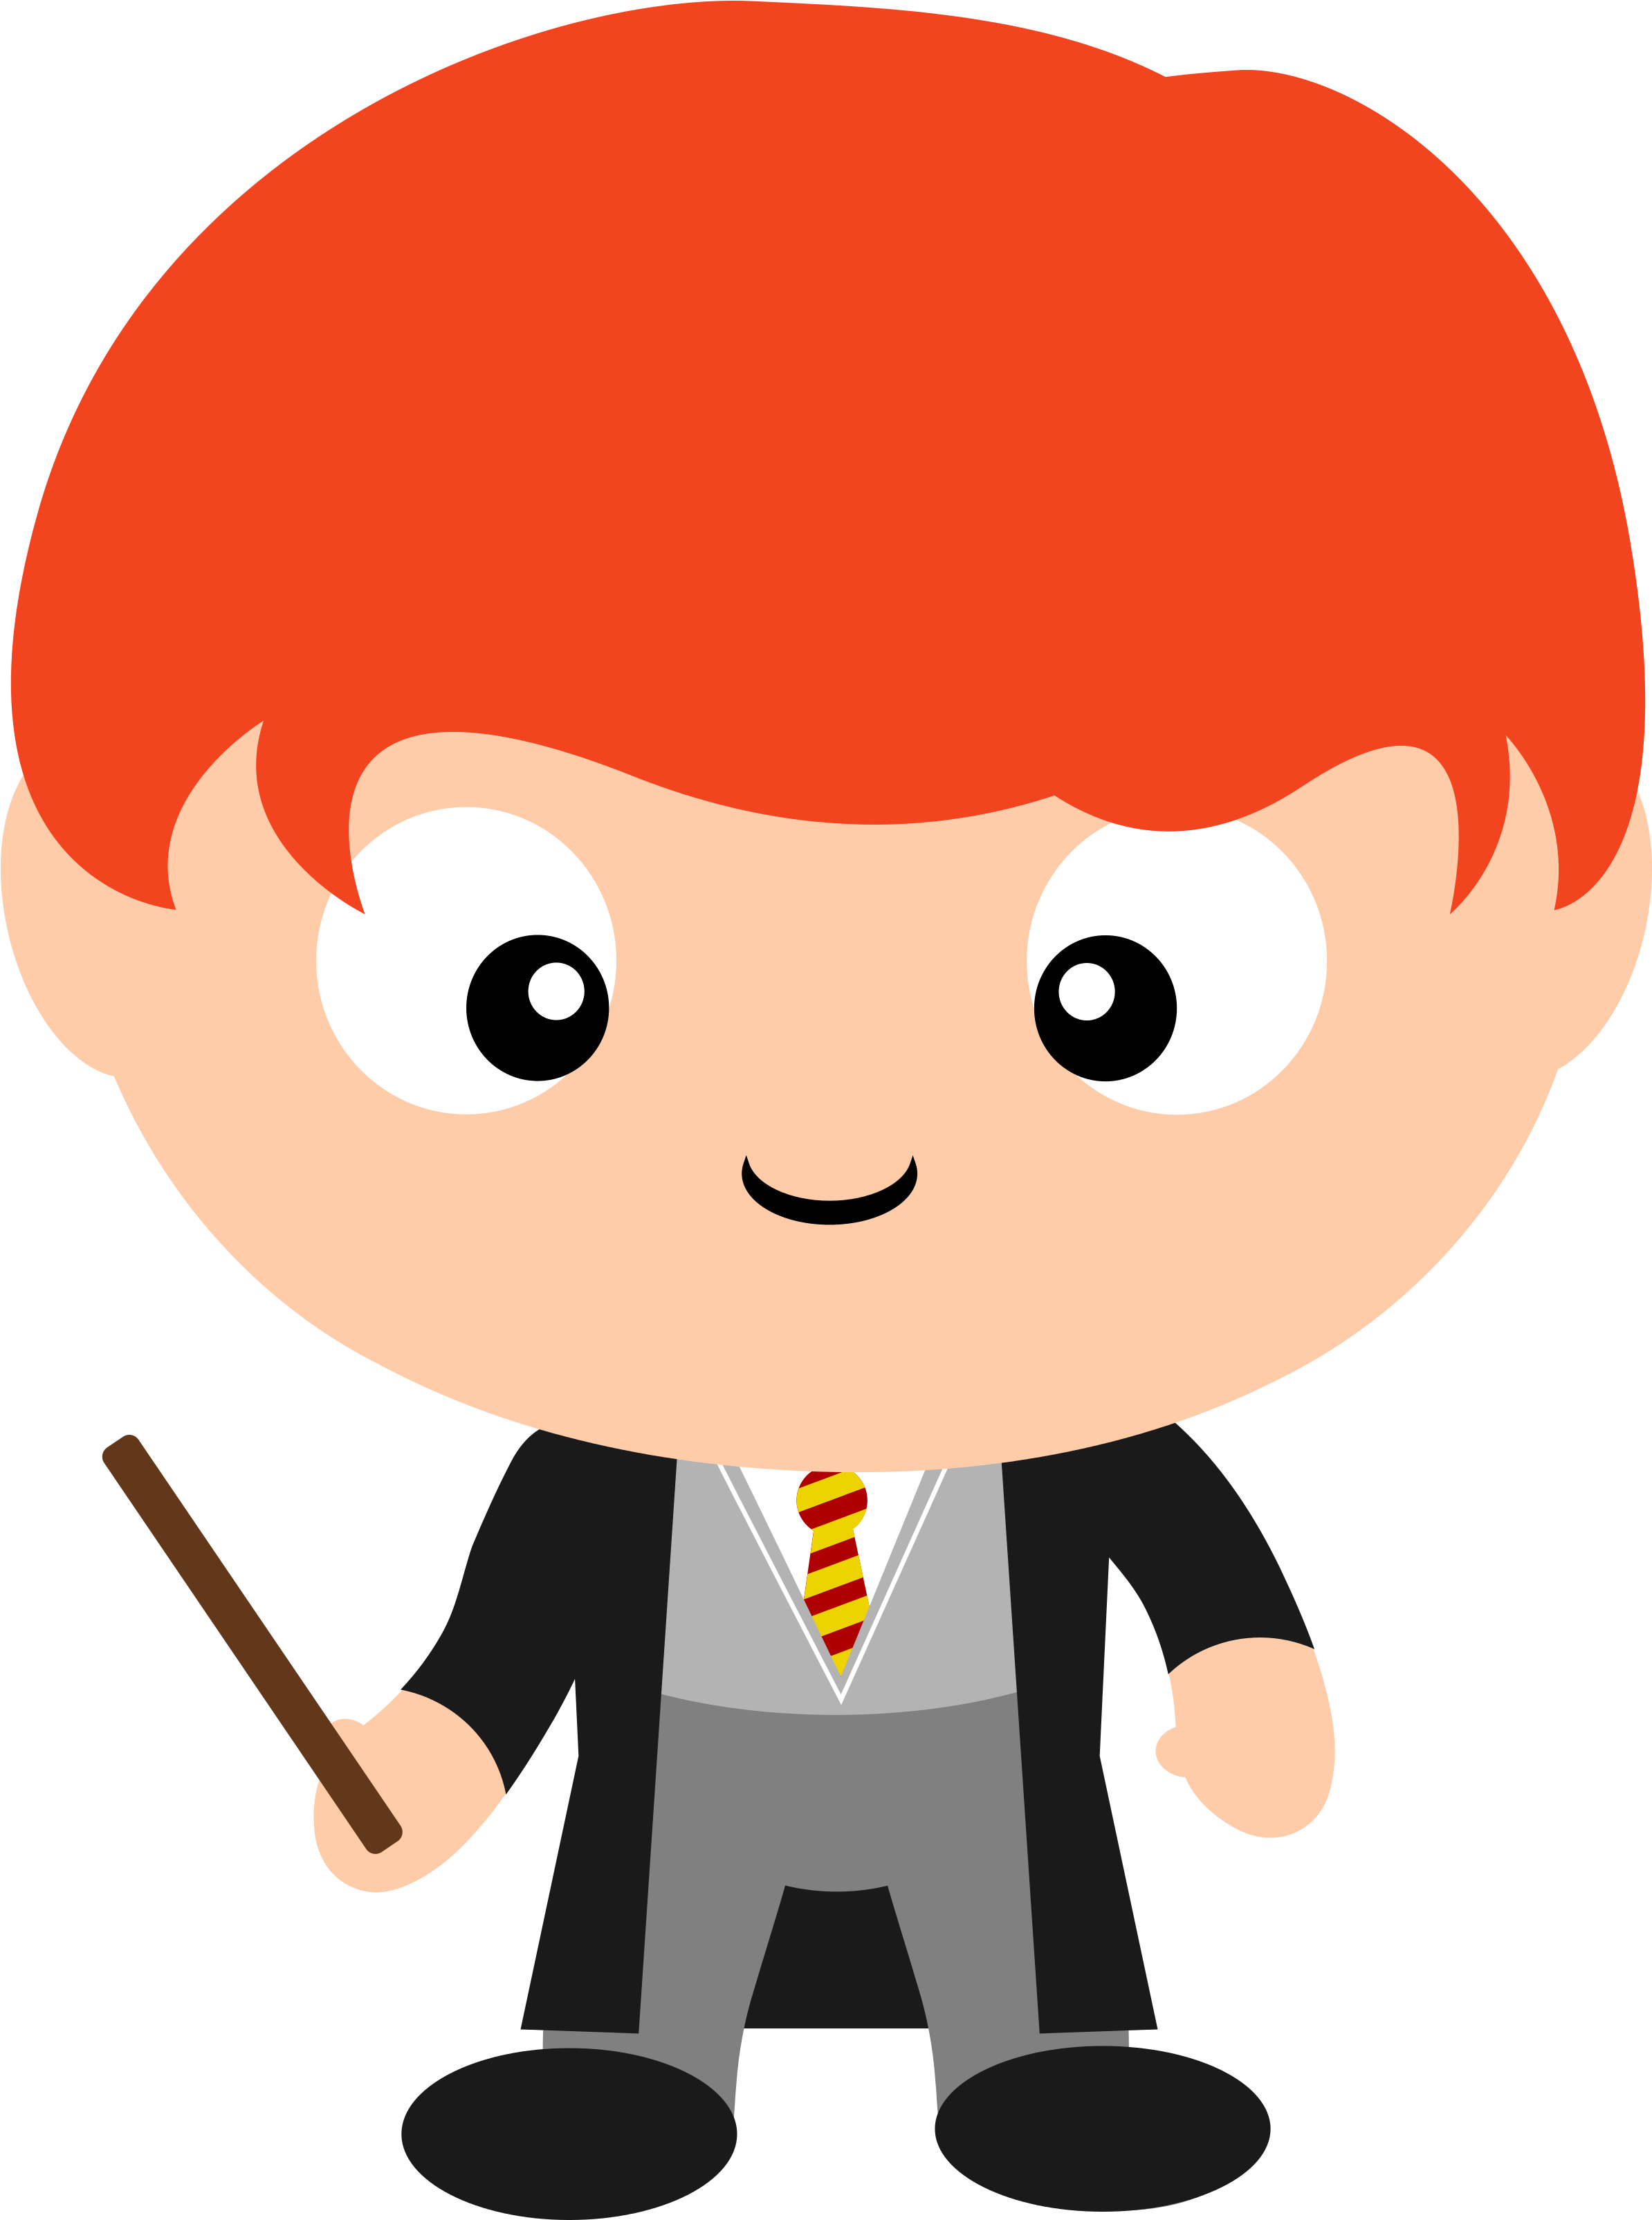 Download Harry Potter Clipart Harry Potter Clipart Png Png Image With